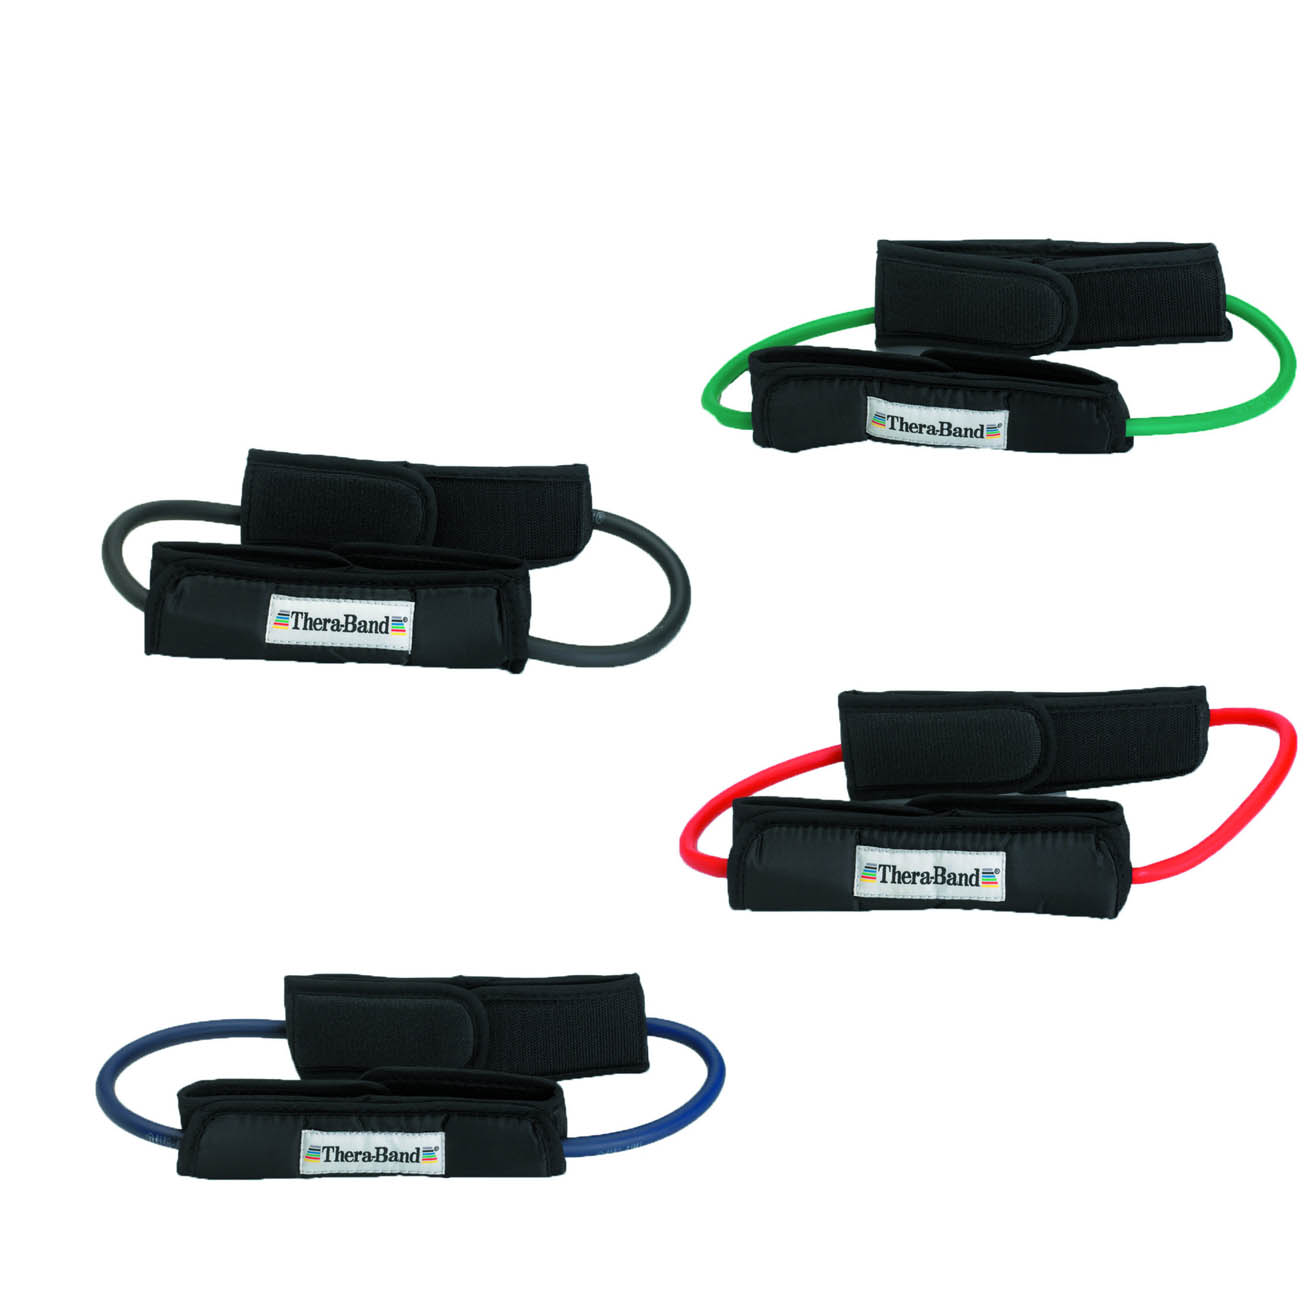 EXERCISE MINI BANDS THERABAND WITH PADDED CUFFS